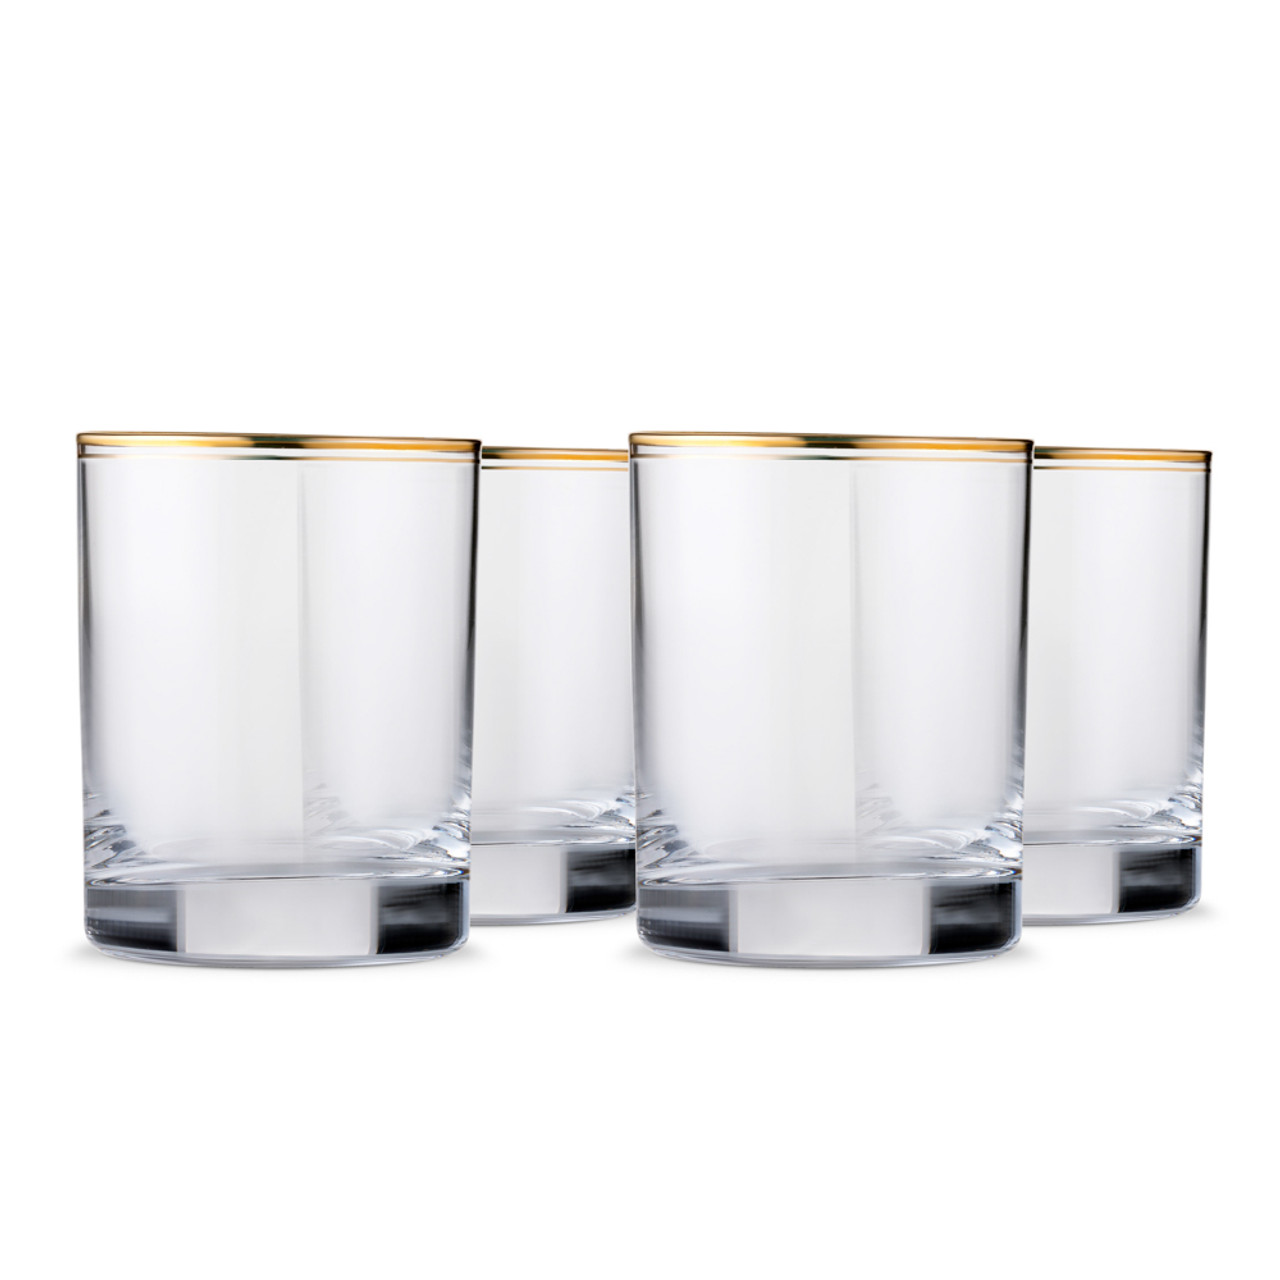 Promotional Stainless Steel Shot Glass Set - 1 oz.